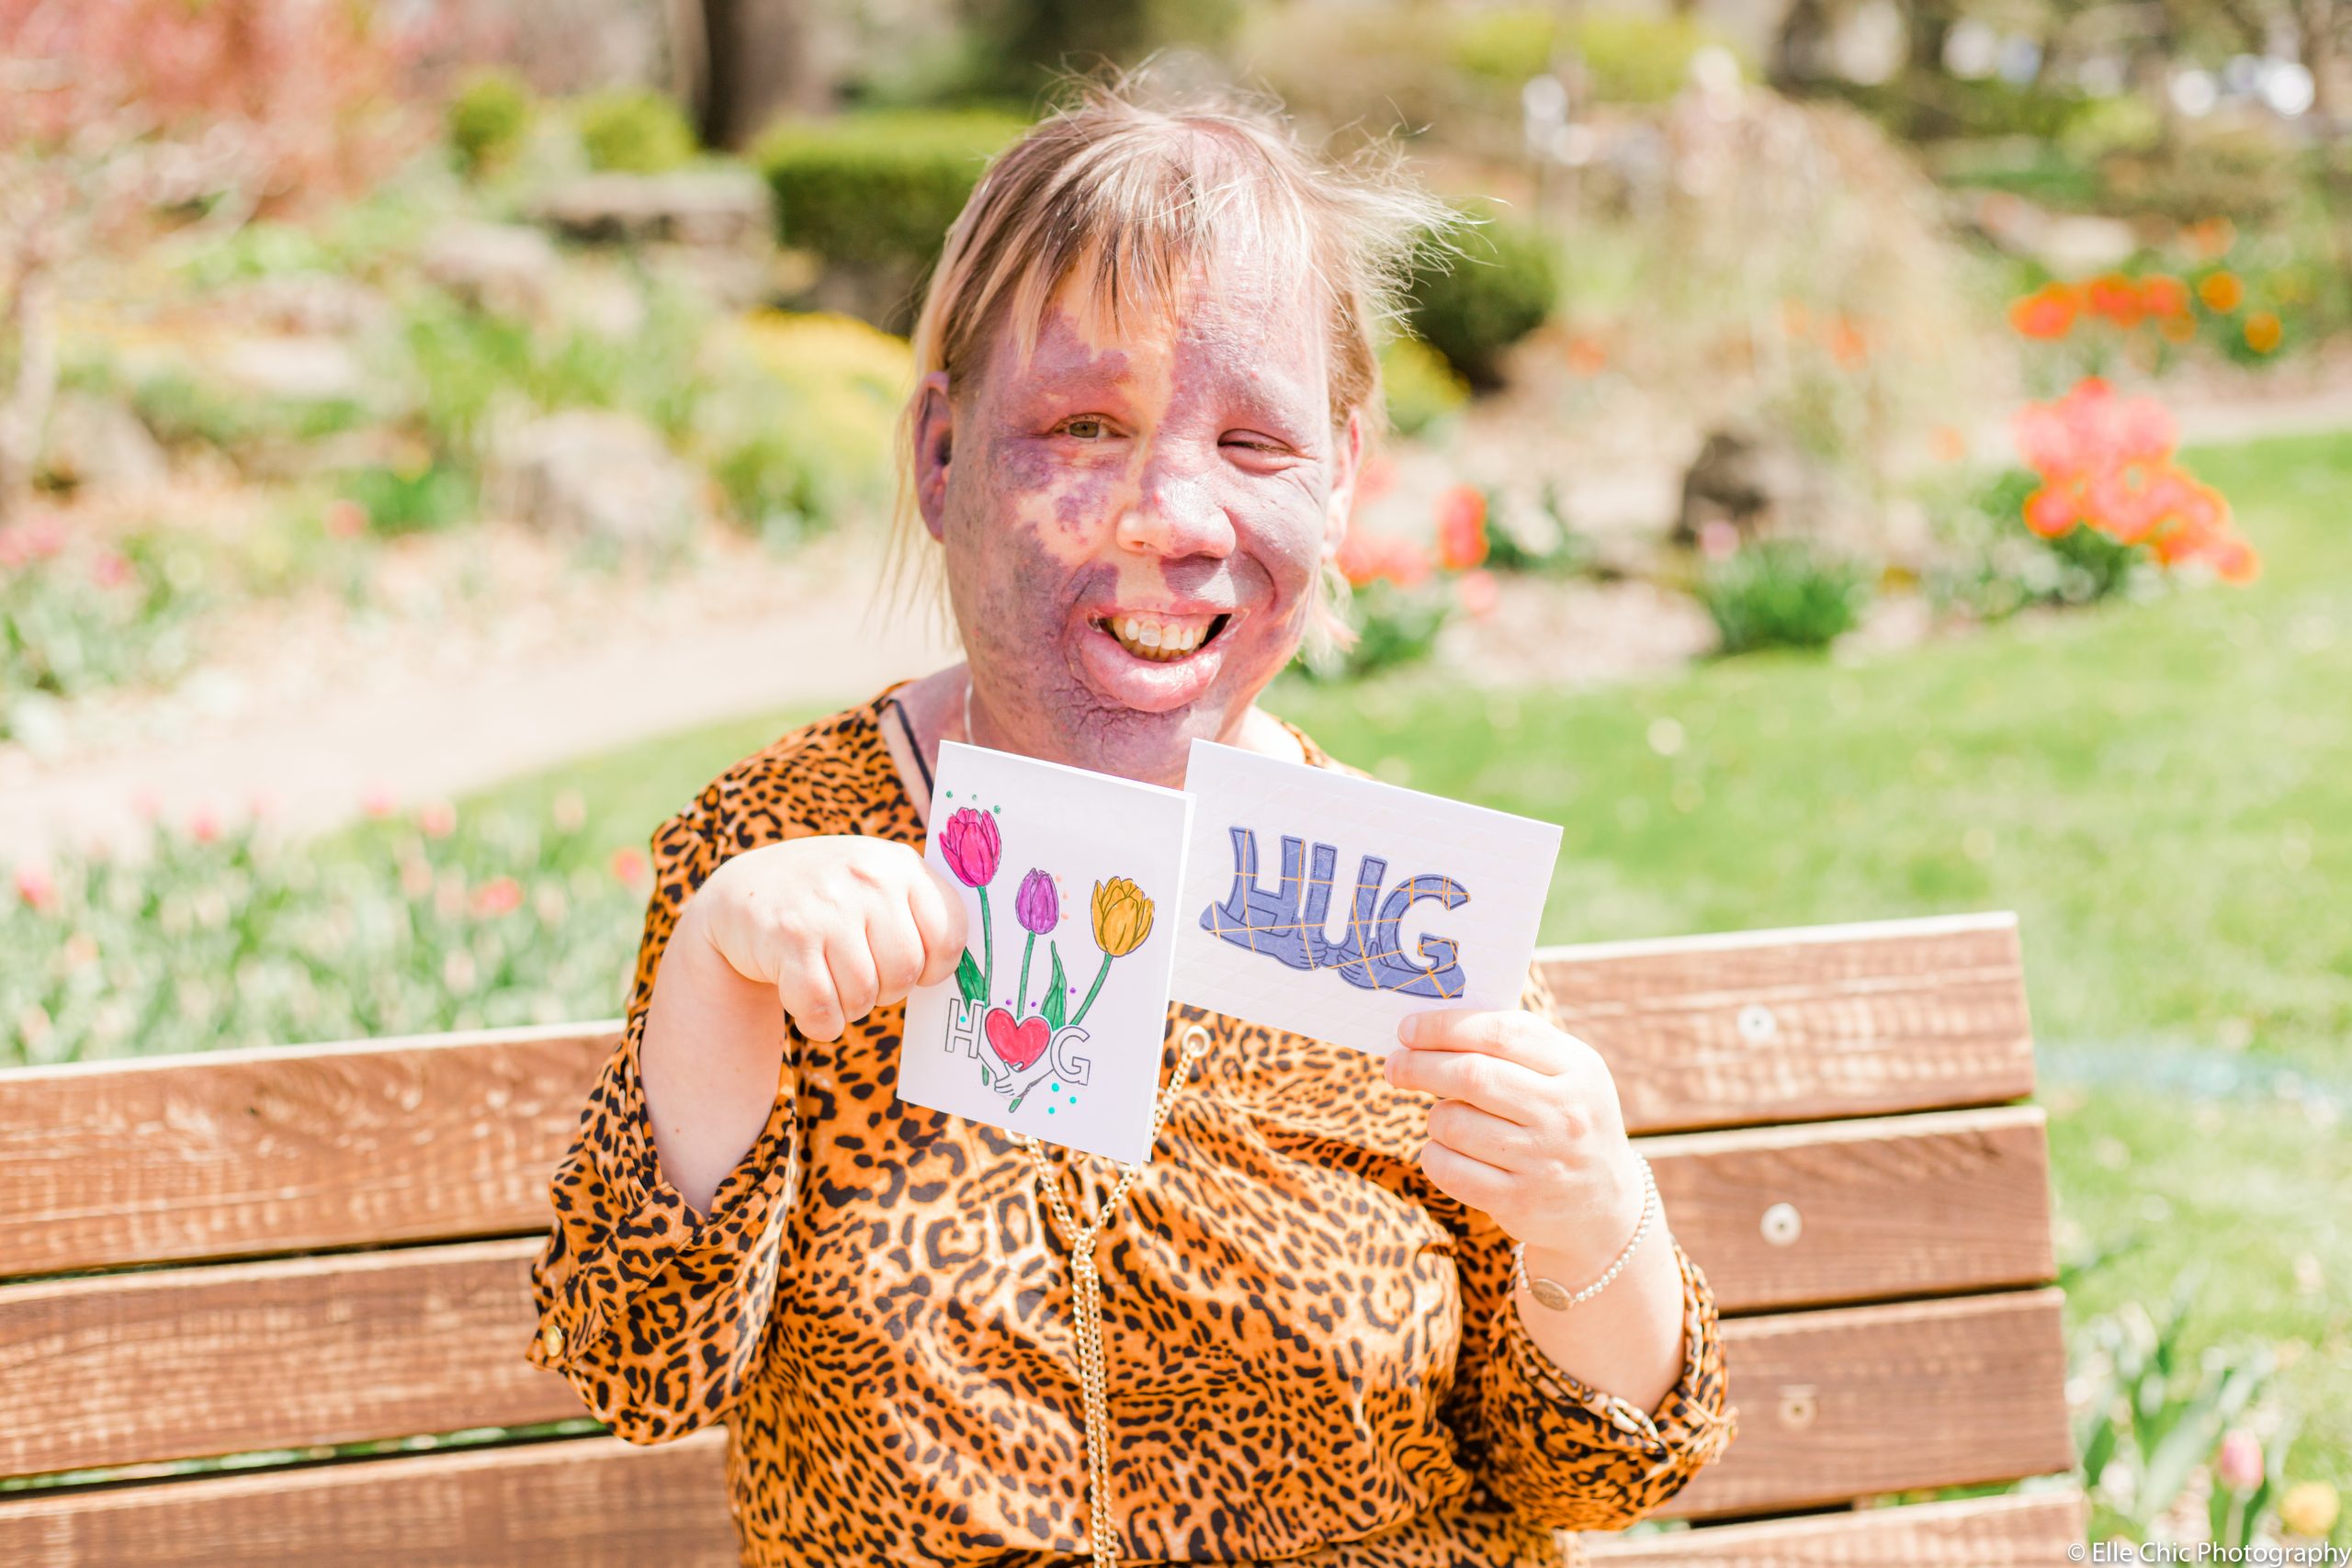 we've got this, photo series, one year later, covid-19, community living guelph wellington, elle chic photography, guelph ontario, disability, frontline heroes, hugs cards, jackie, margo